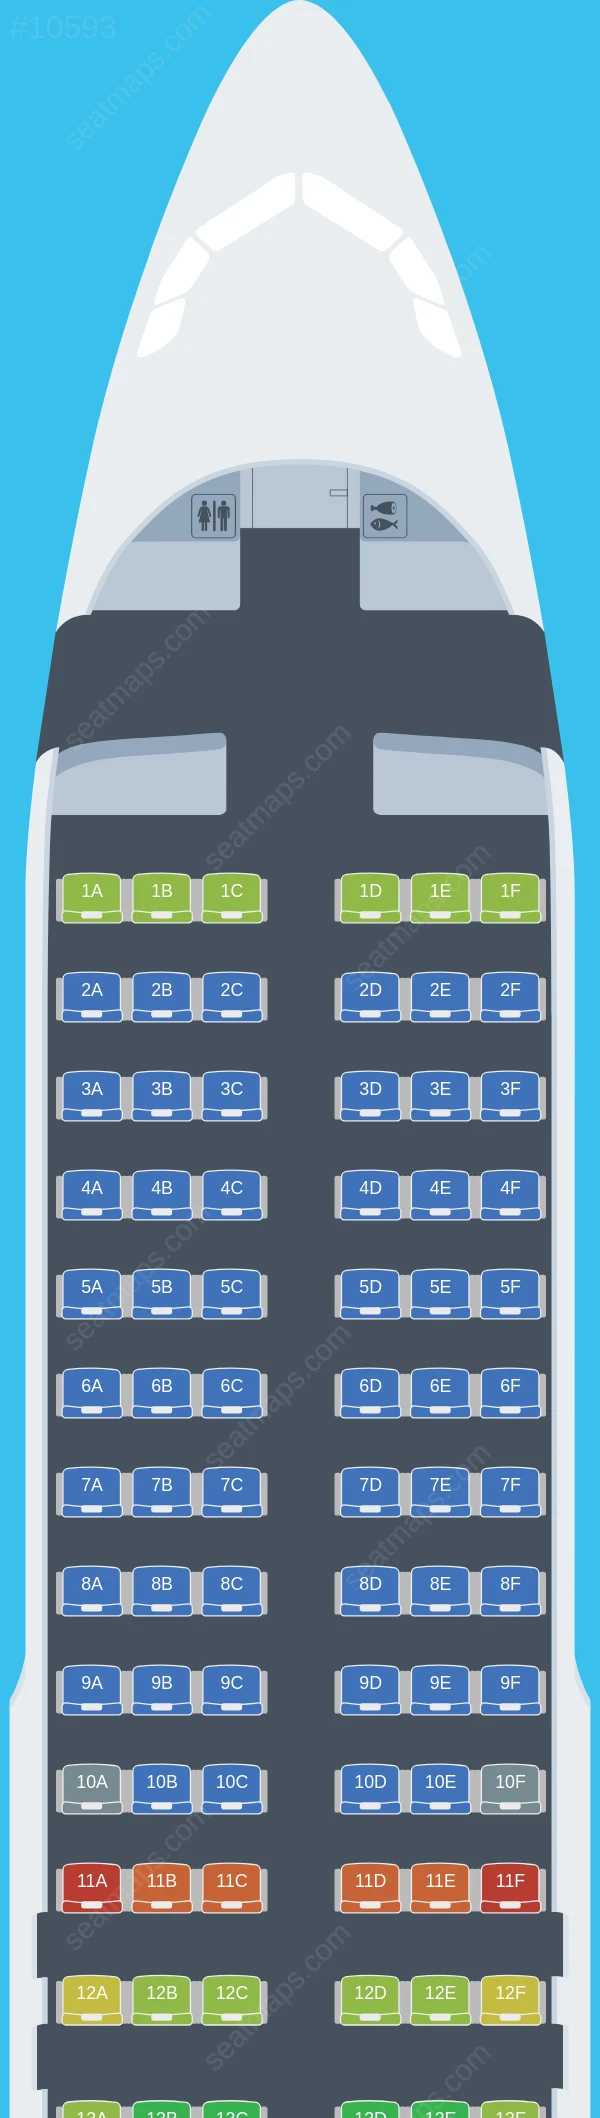 Qanot Sharq  Airlines Airbus A320-200 seatmap preview